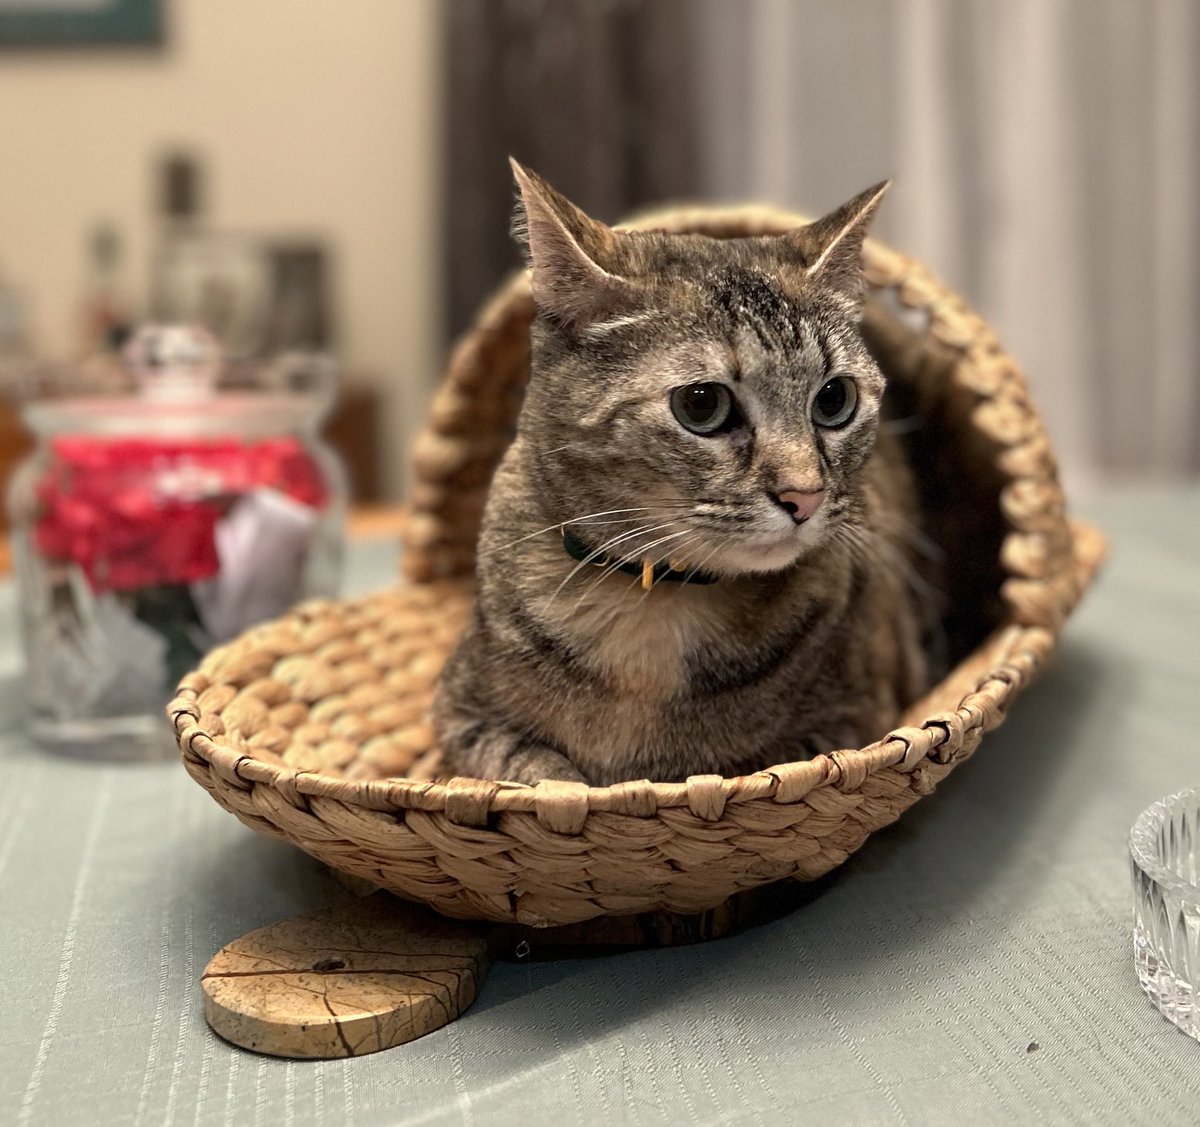 No box today so it’s Happy #catbasketsunday I hope you are having a terrific #SundayFunday Thank you for all the birthday wishes yesterday! We love being a part of this community #CatsOfTwitter #catsofX #TabbyTroop #sundayvibes